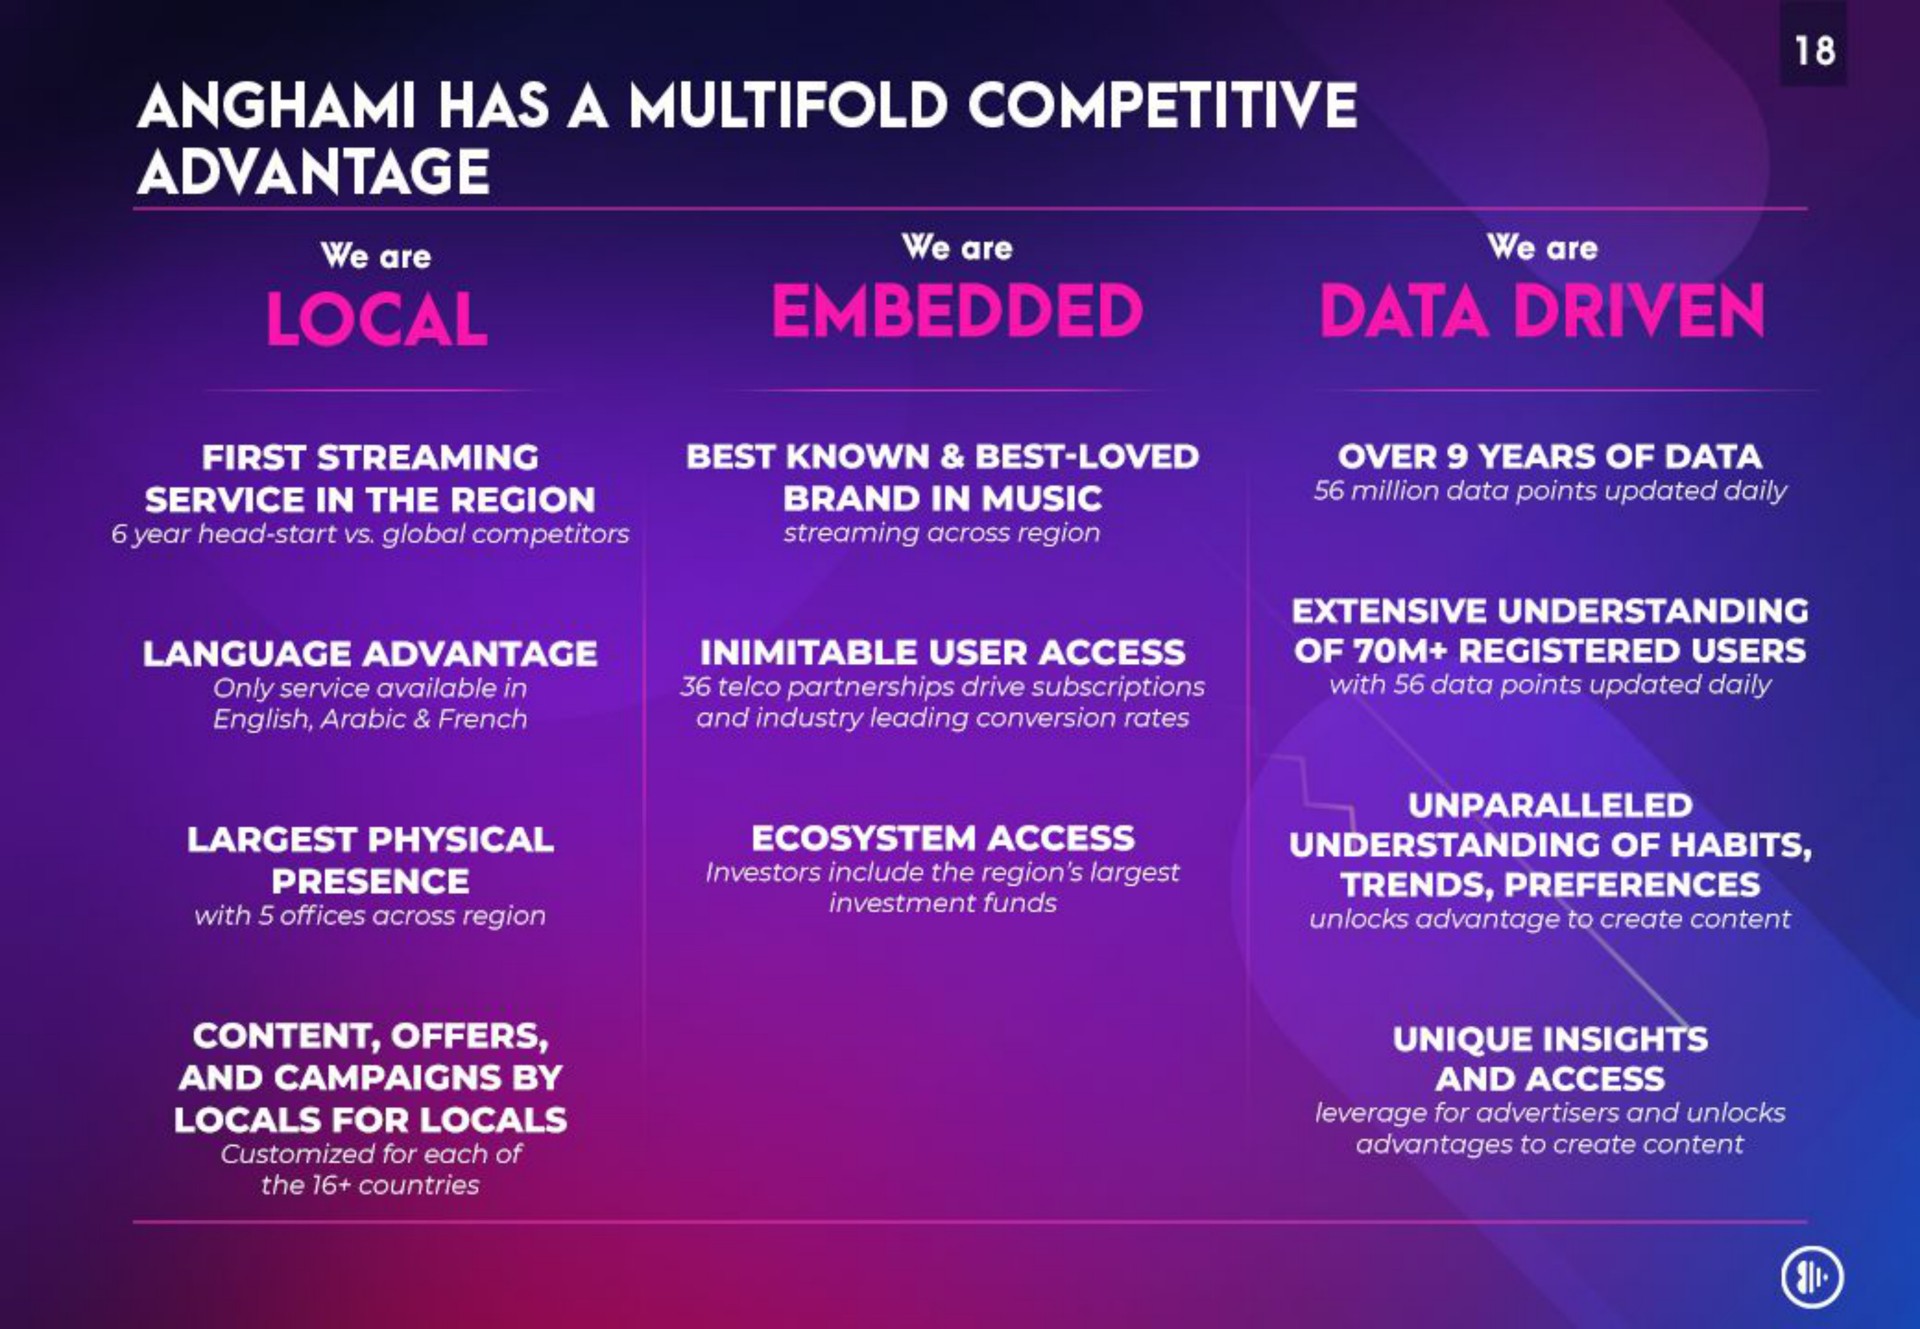 has a multifold competitive advantage | Anghami